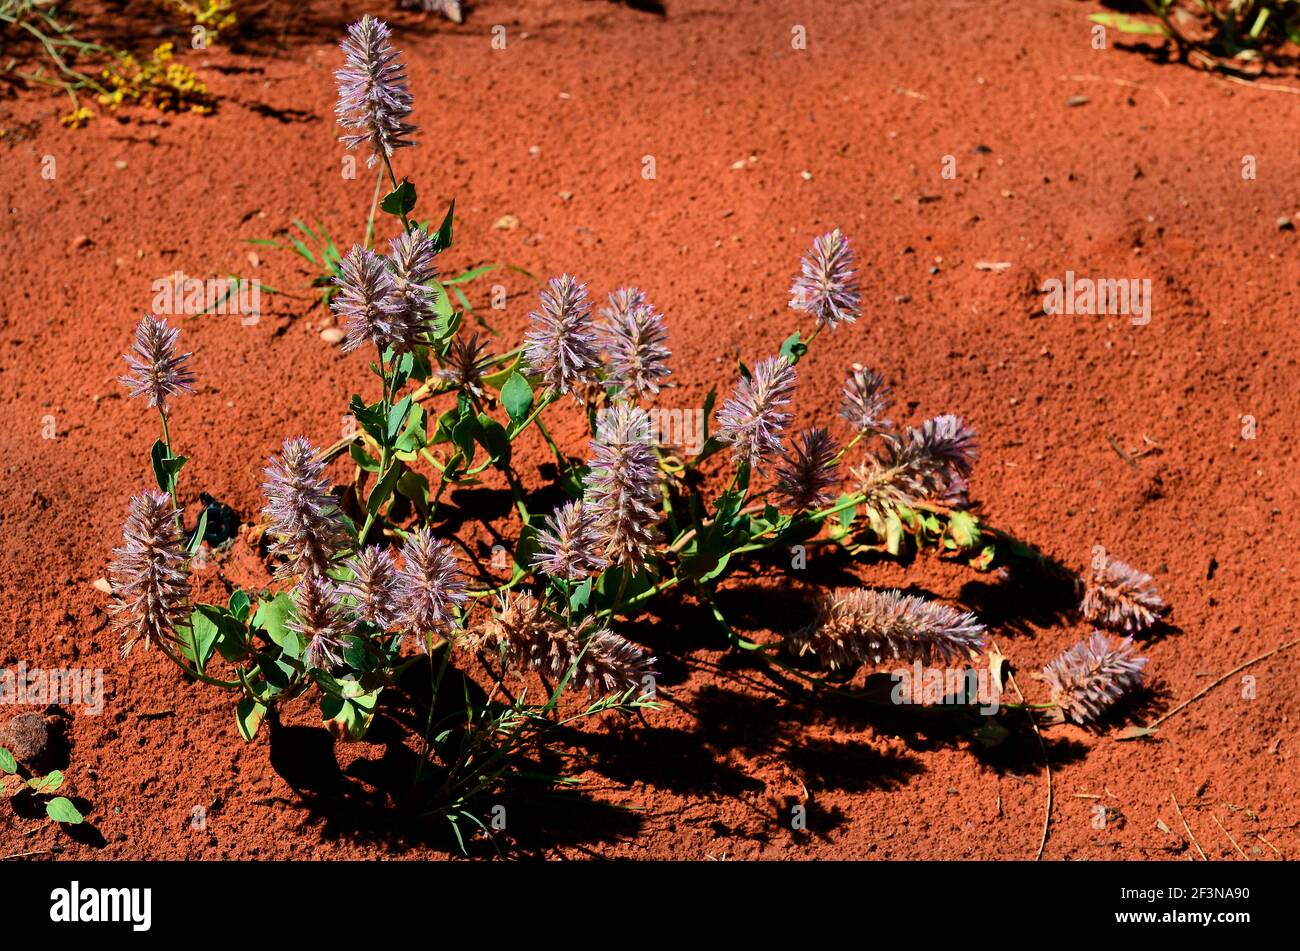 Ptilotus Photography and Images - Alamy